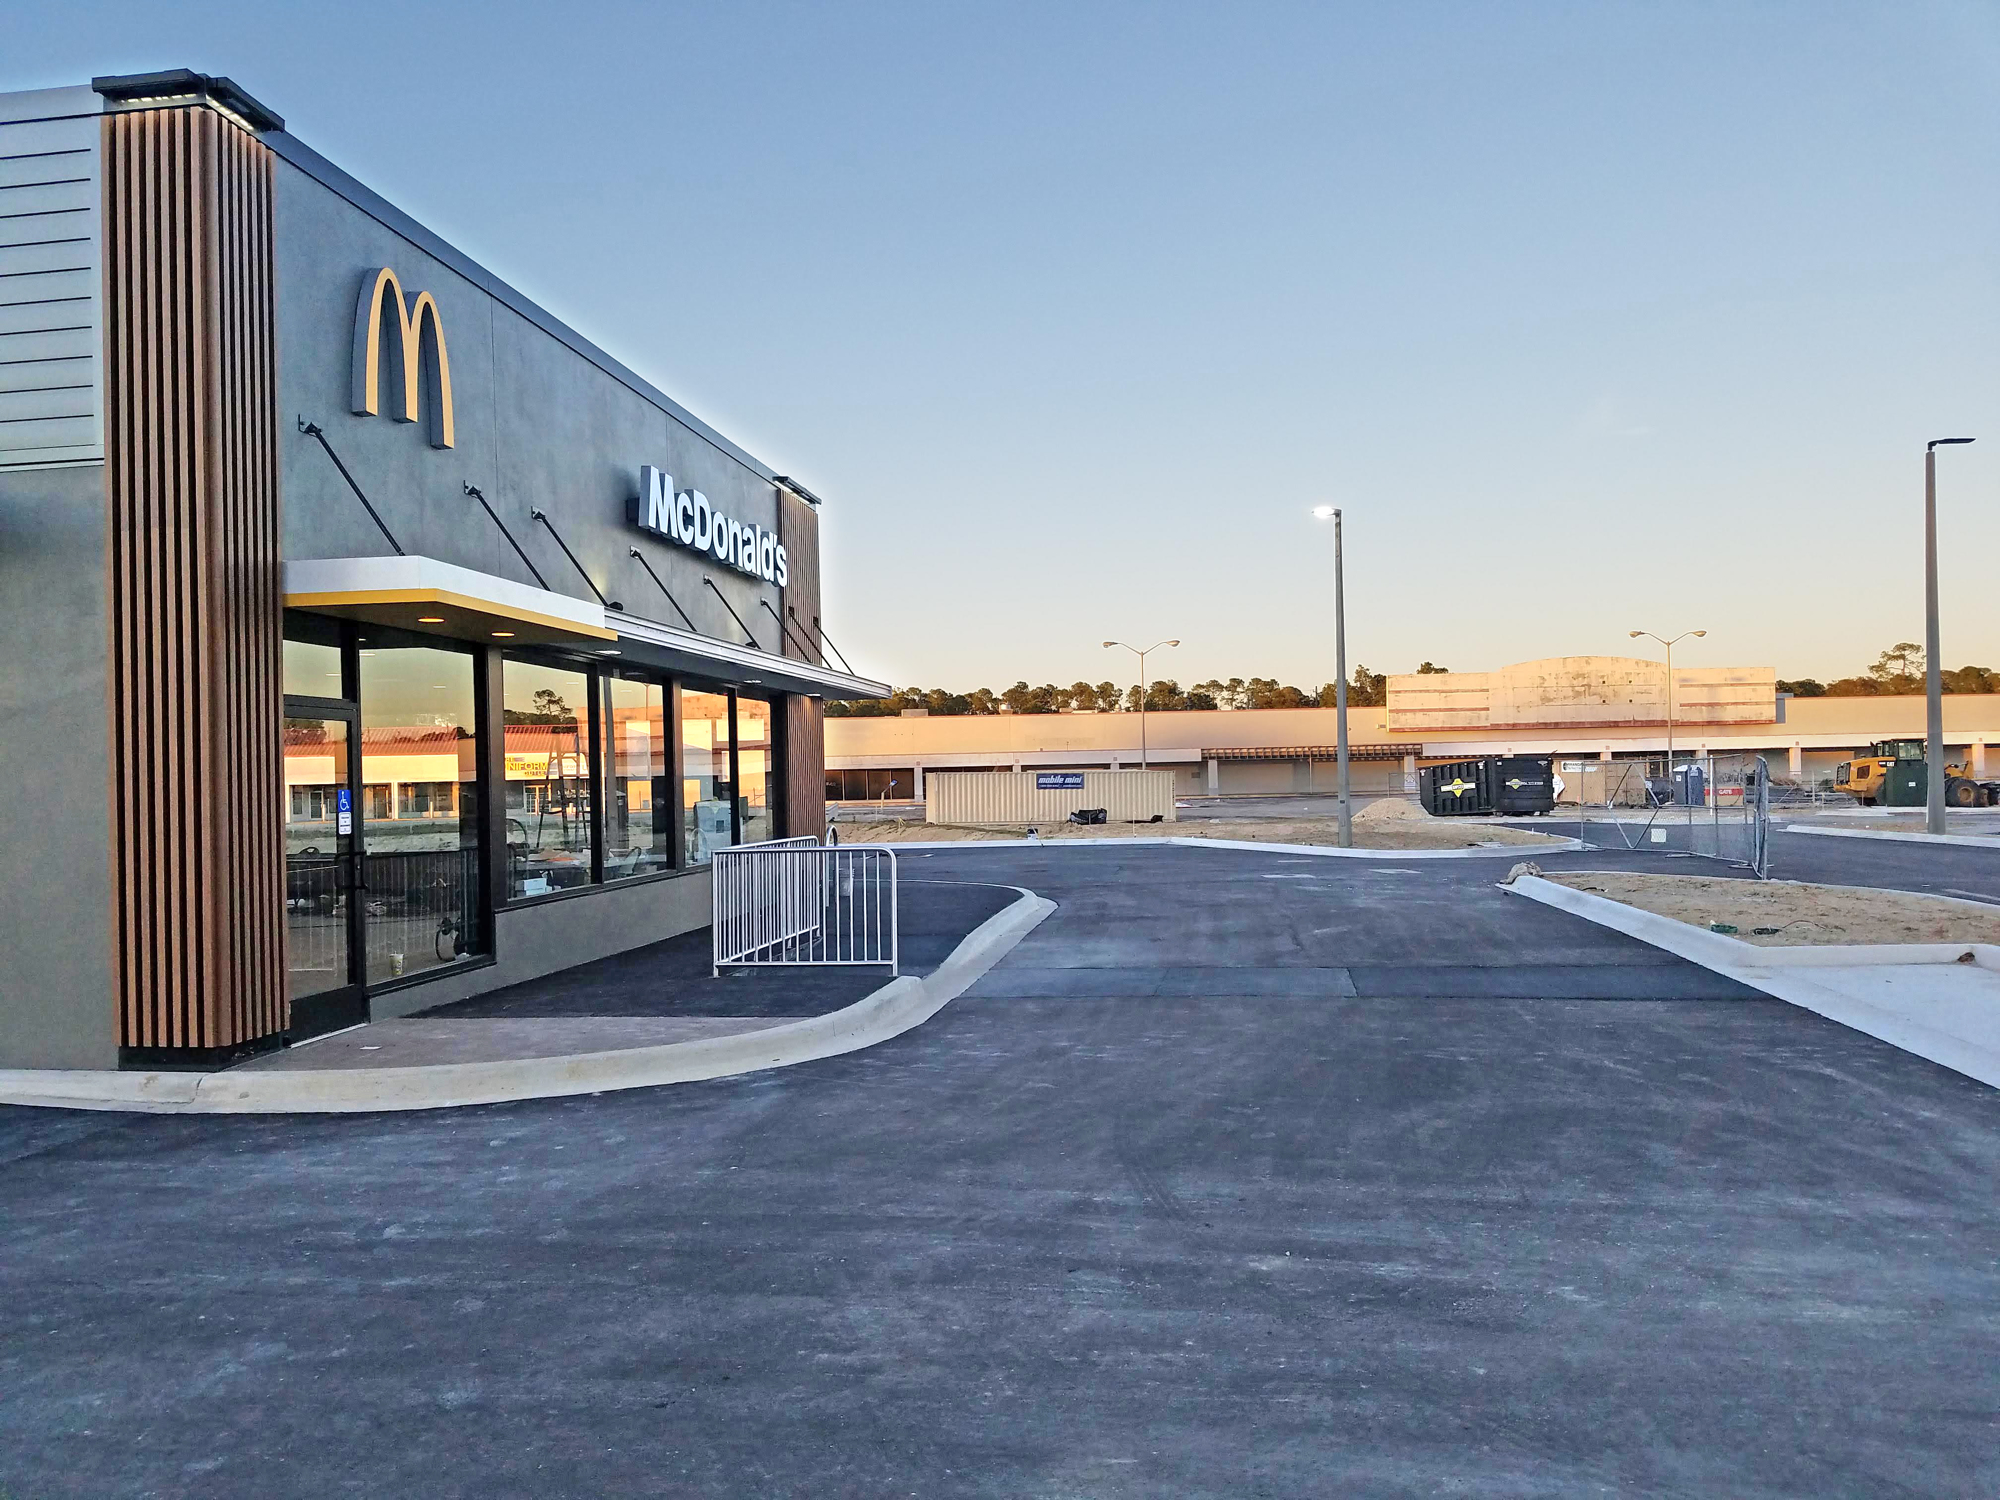 McDonald's is under construction in front of the Beach Boulevard former Kmart and is nearly complete.